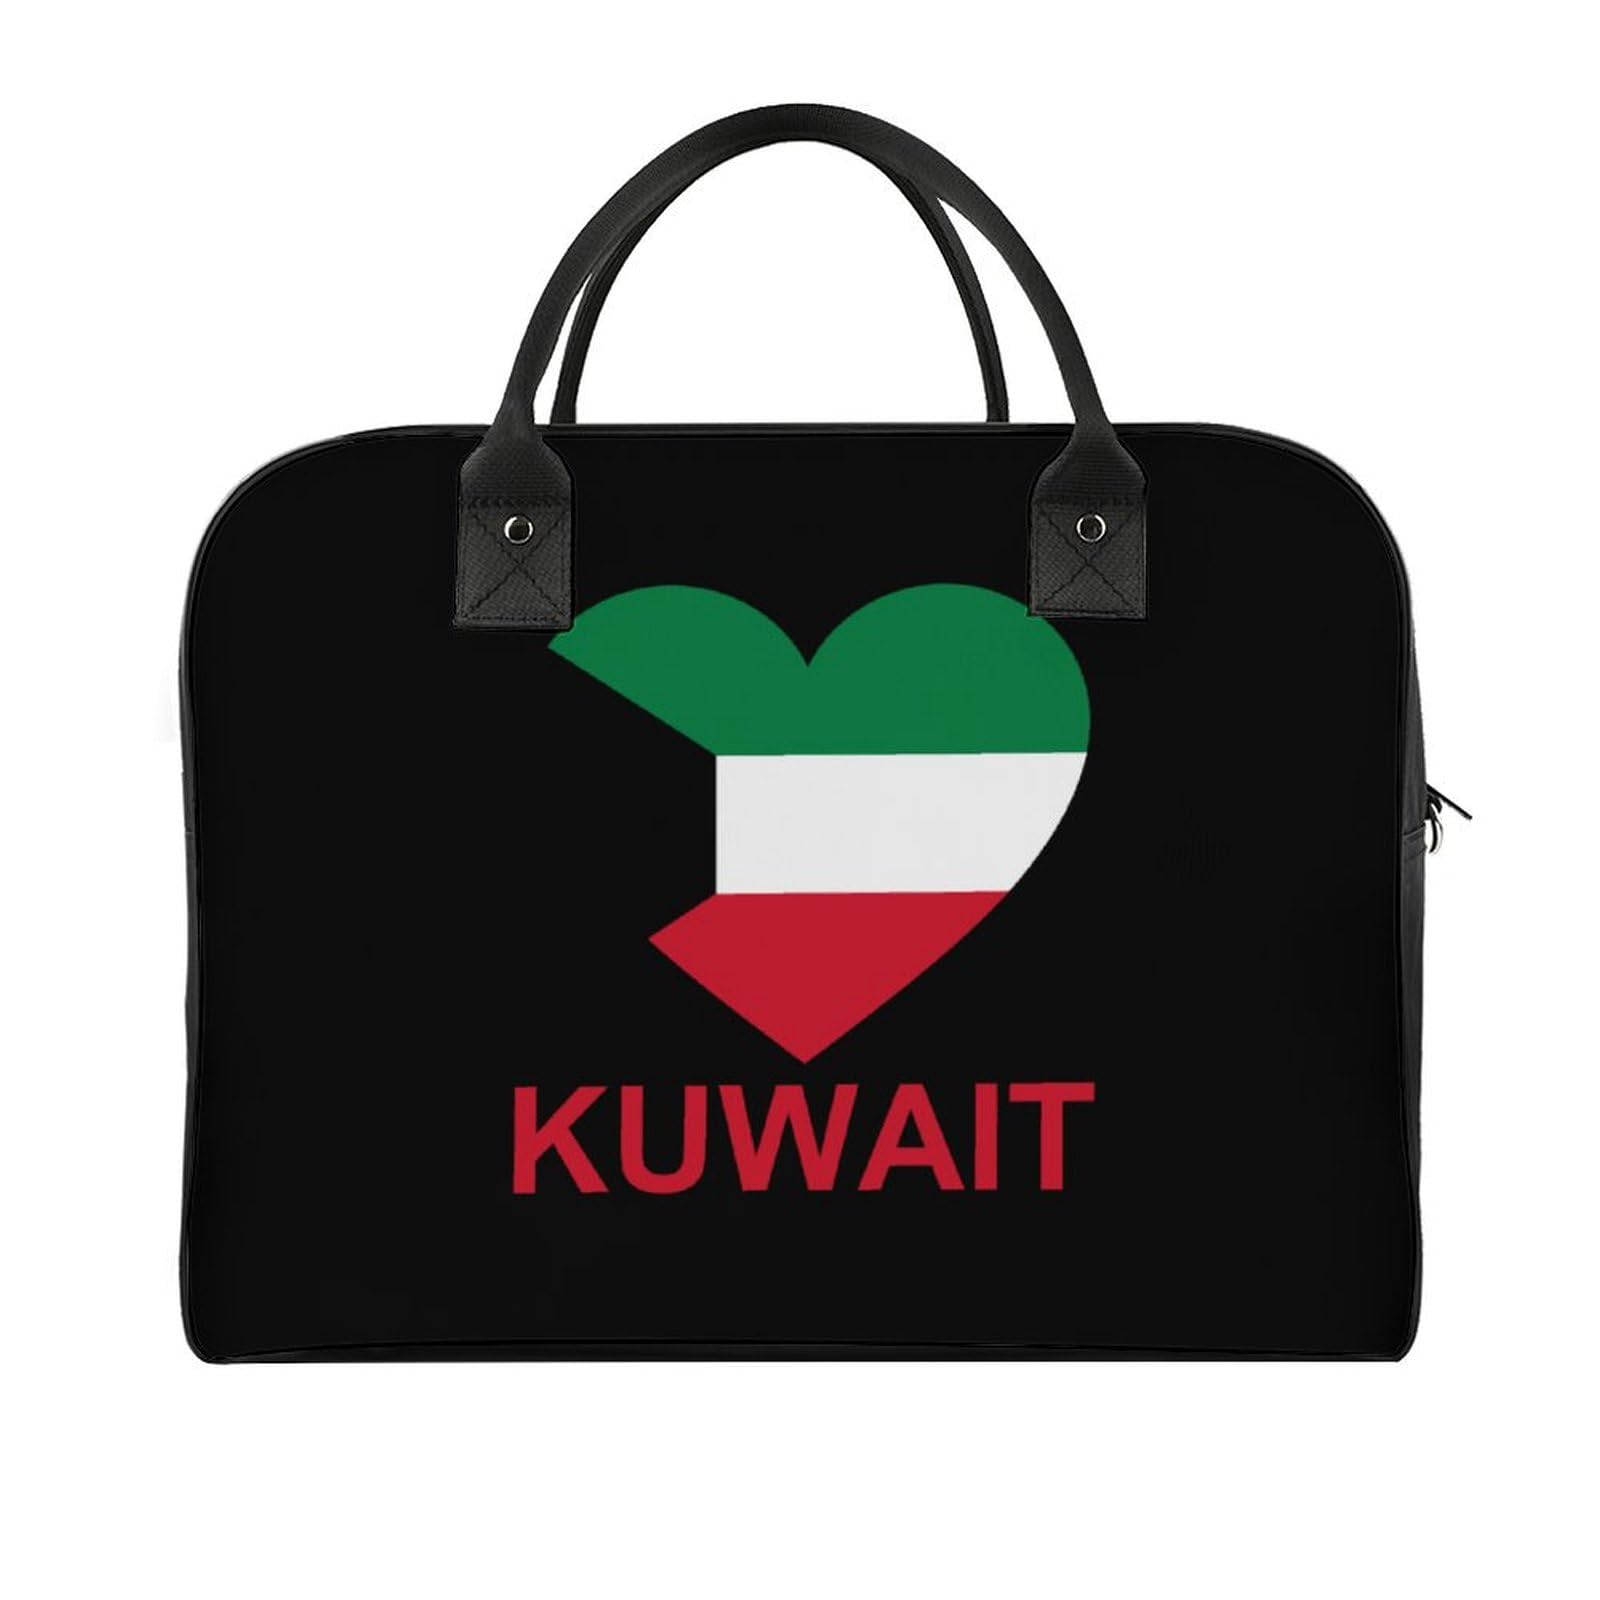 Love Kuwait Large Crossbody Bag Laptop Bags Shoulder Handbags Tote with Strap for Travel Office